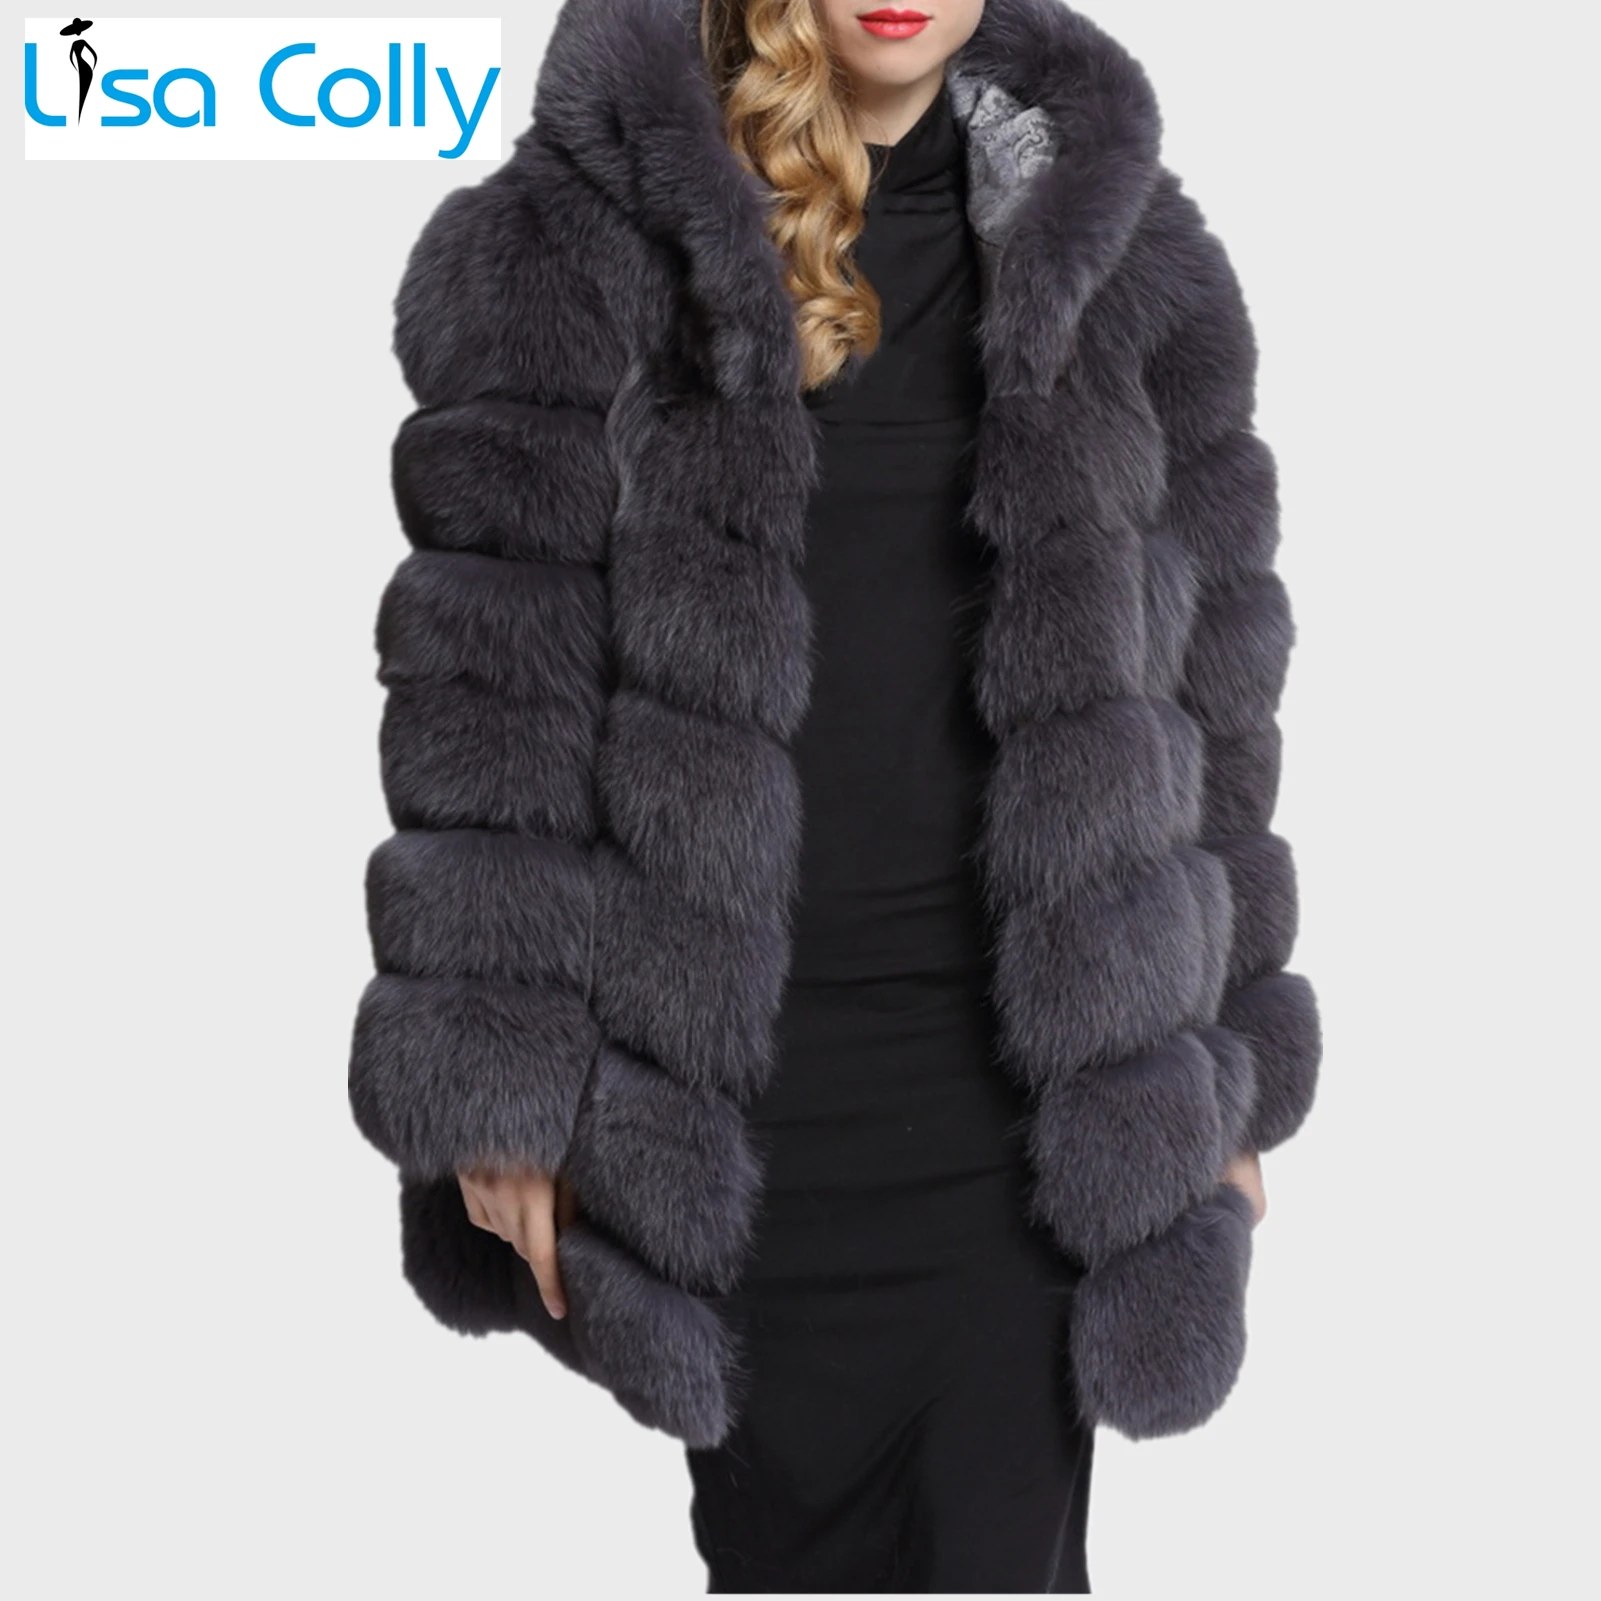 Lisa Colly High-Grade Fashion Women Winter Hooded Fake Fur Jackets Coats Artificial Fox Fur Coat Outwear Casual Party Overcoat